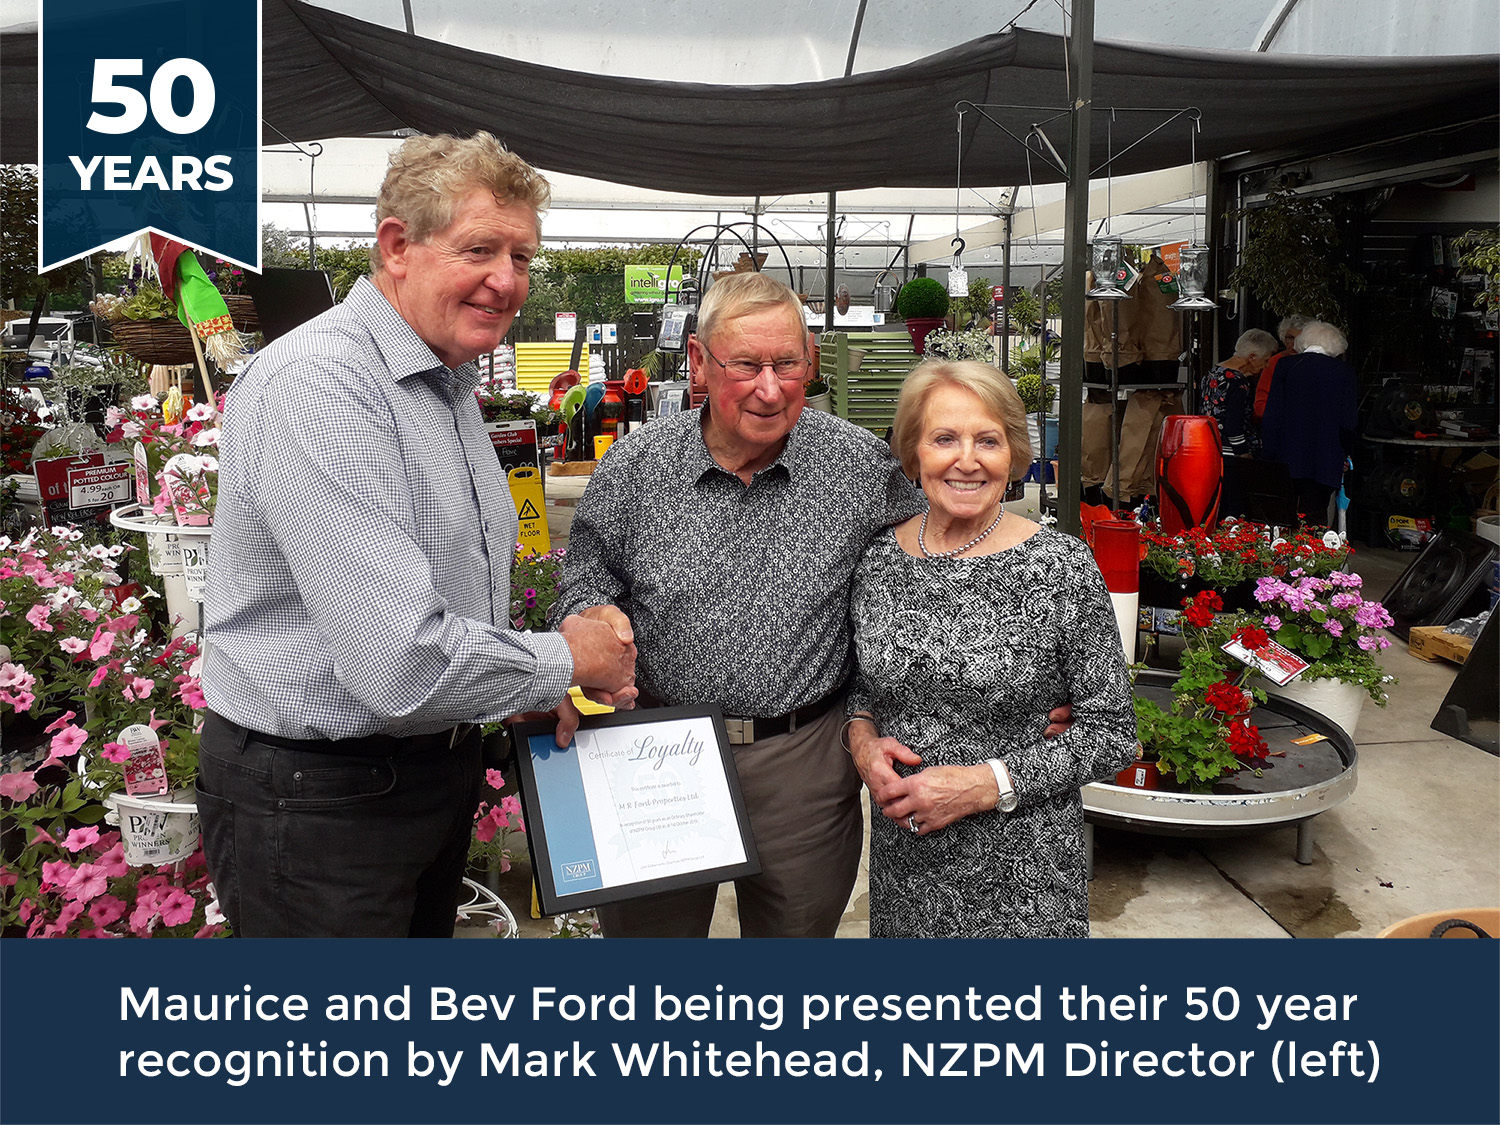 Maurice and Bev Ford - 50 year recognition